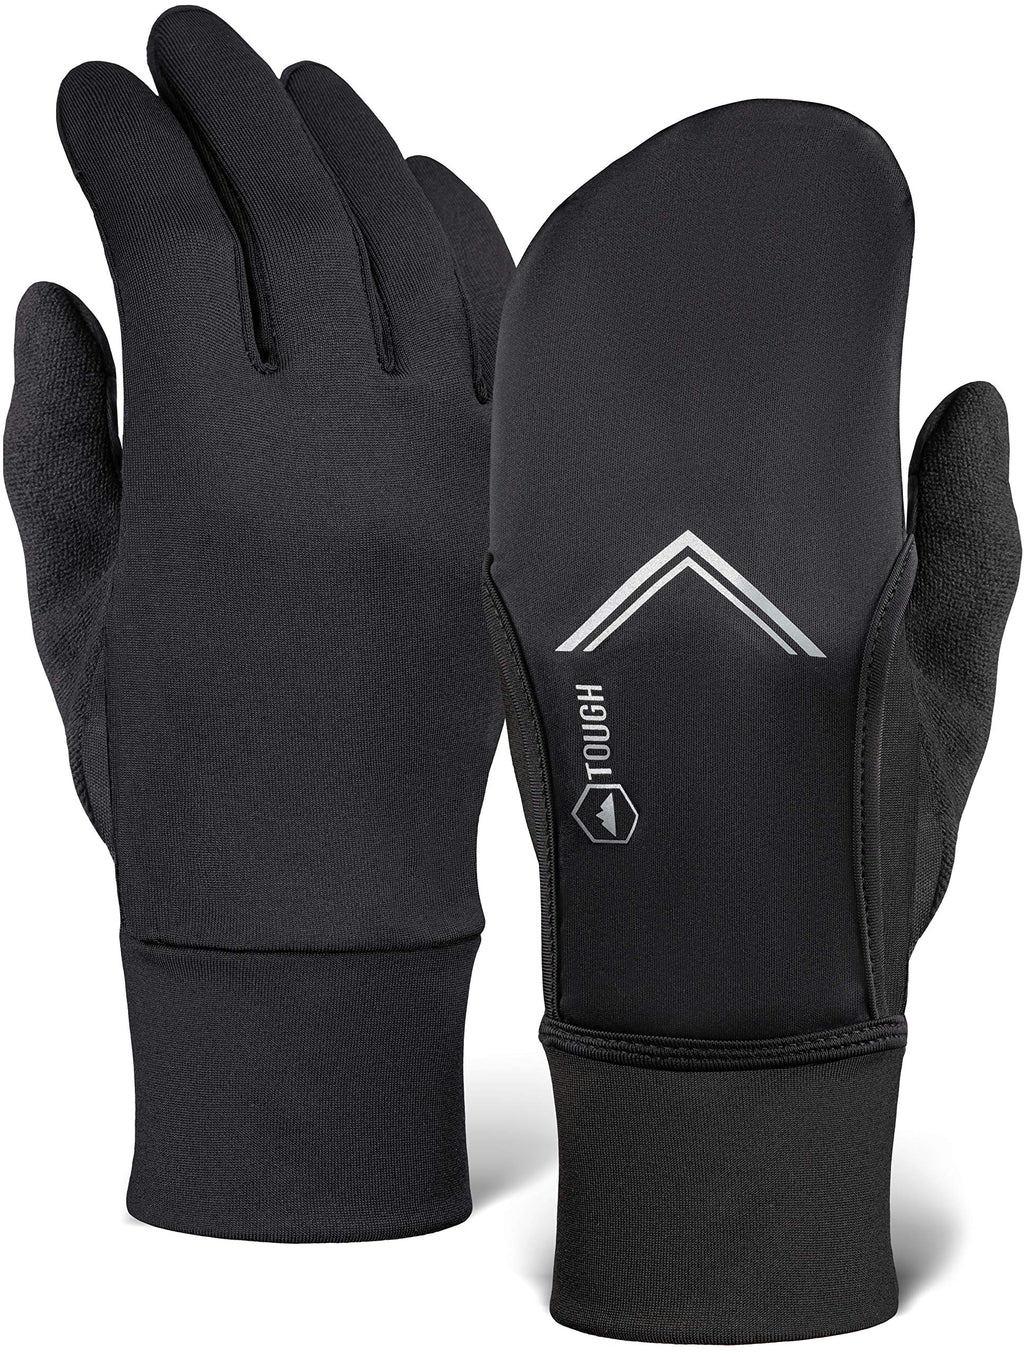 [AUSTRALIA] - Running Mitten Gloves with Touch Screen - Winter Glove Liners with Convertible Mittens Cover for Texting, Cycling & Driving - Thin, Lightweight, Warm Cold Weather Thermal Sports Gloves for Men & Women Medium / Large 